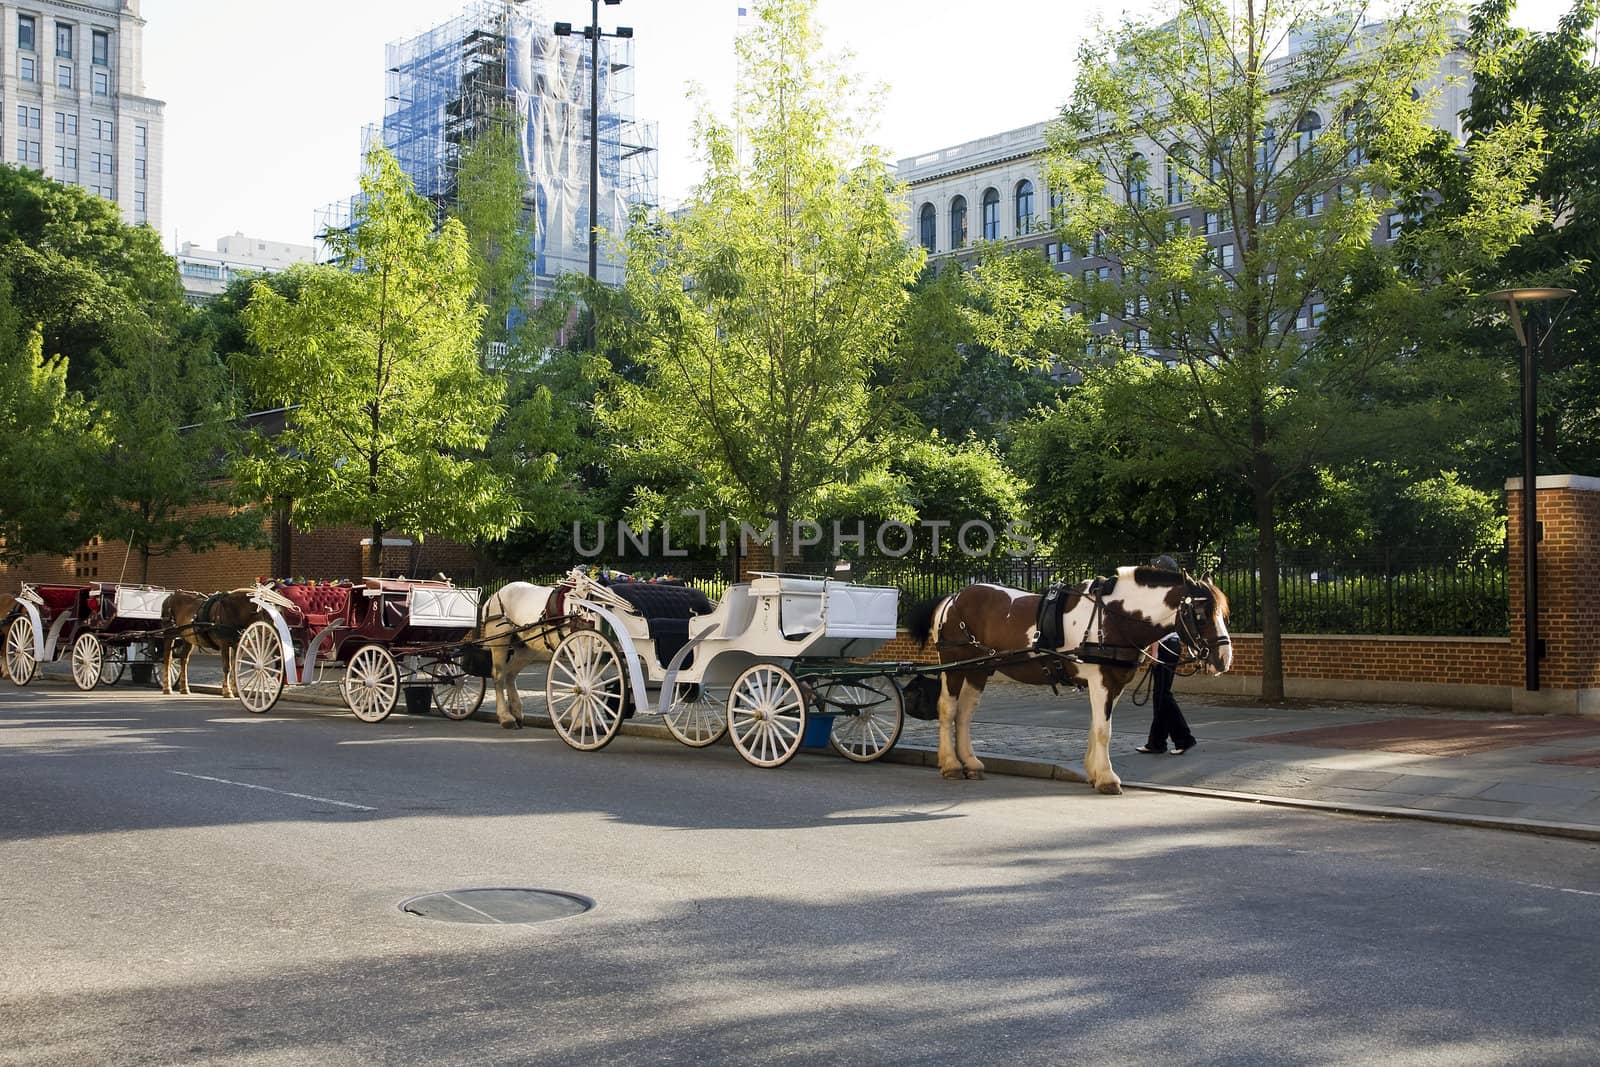 Horse drawn carriages waiting for customers in front of a park in Philadelphia.